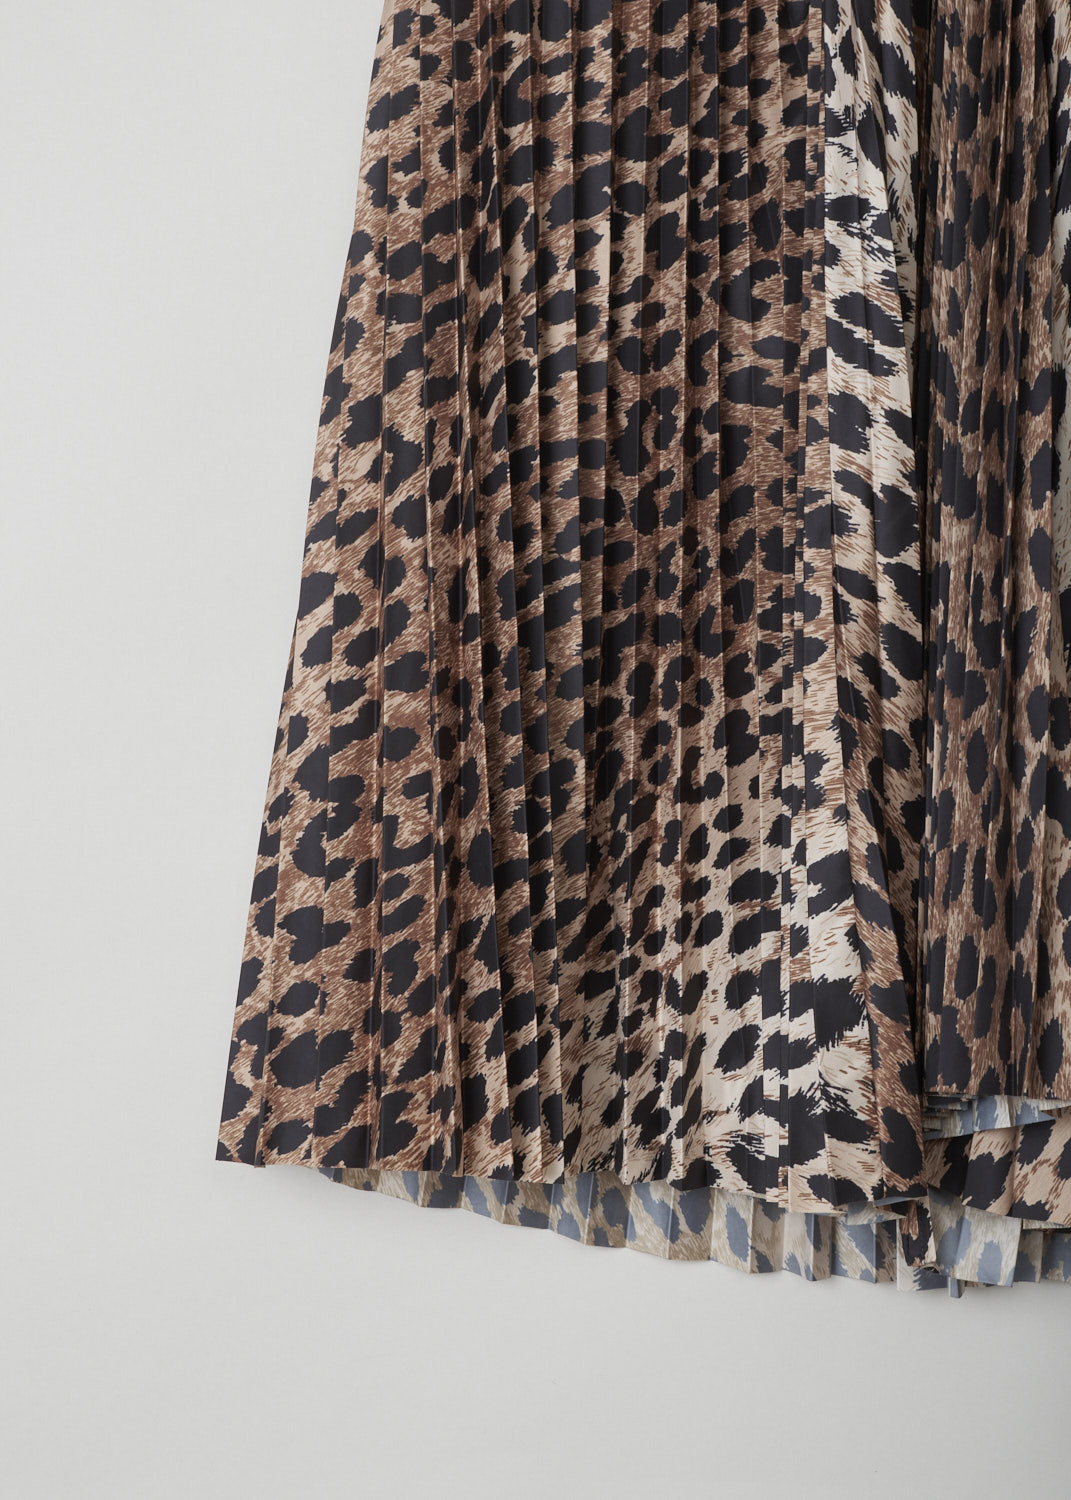 Balenciaga, Accordion pleated leopard print skirt, 601196_TGL35_9501, brown, beige, black, detail, Mid-length accordion skirt, printed to a multi-coloured leopard motif. Comes with a broad internal elastic waistband, and has a concealed zipper on the back. 